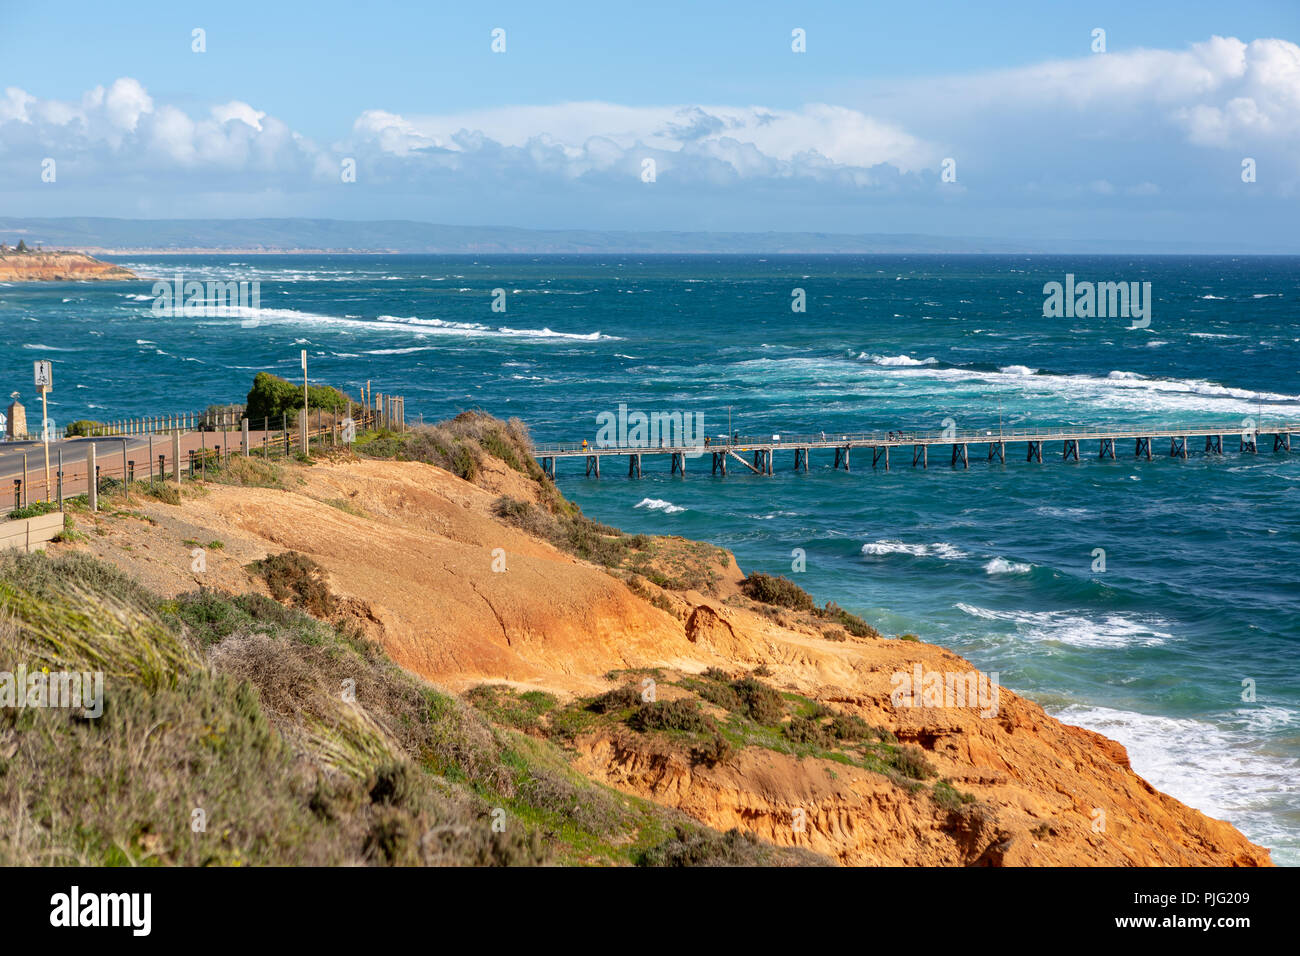 The Port Noarlunga Jetty in rough seas from the northern cliff face in South Australia on the 6th September 2018 Stock Photo